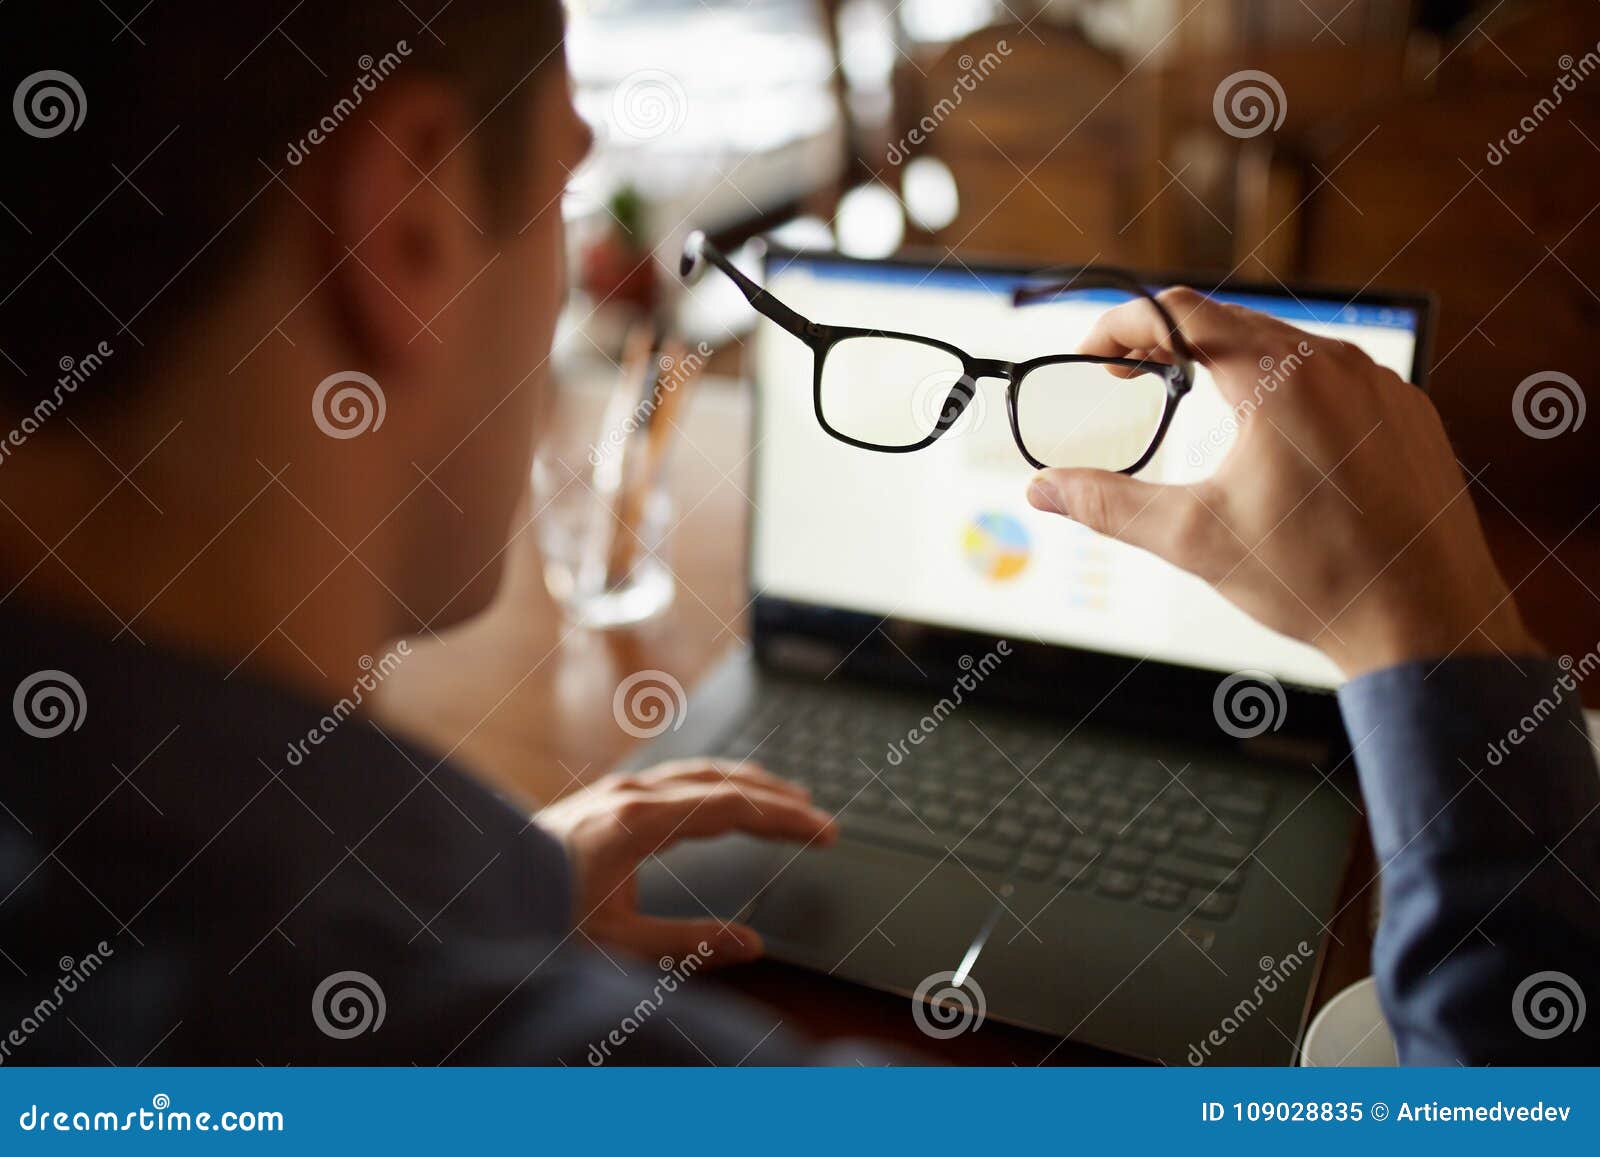 back view of man hand holding eyeglasses in front of laptop screen with charts and diagrams. poor eyesight threatment